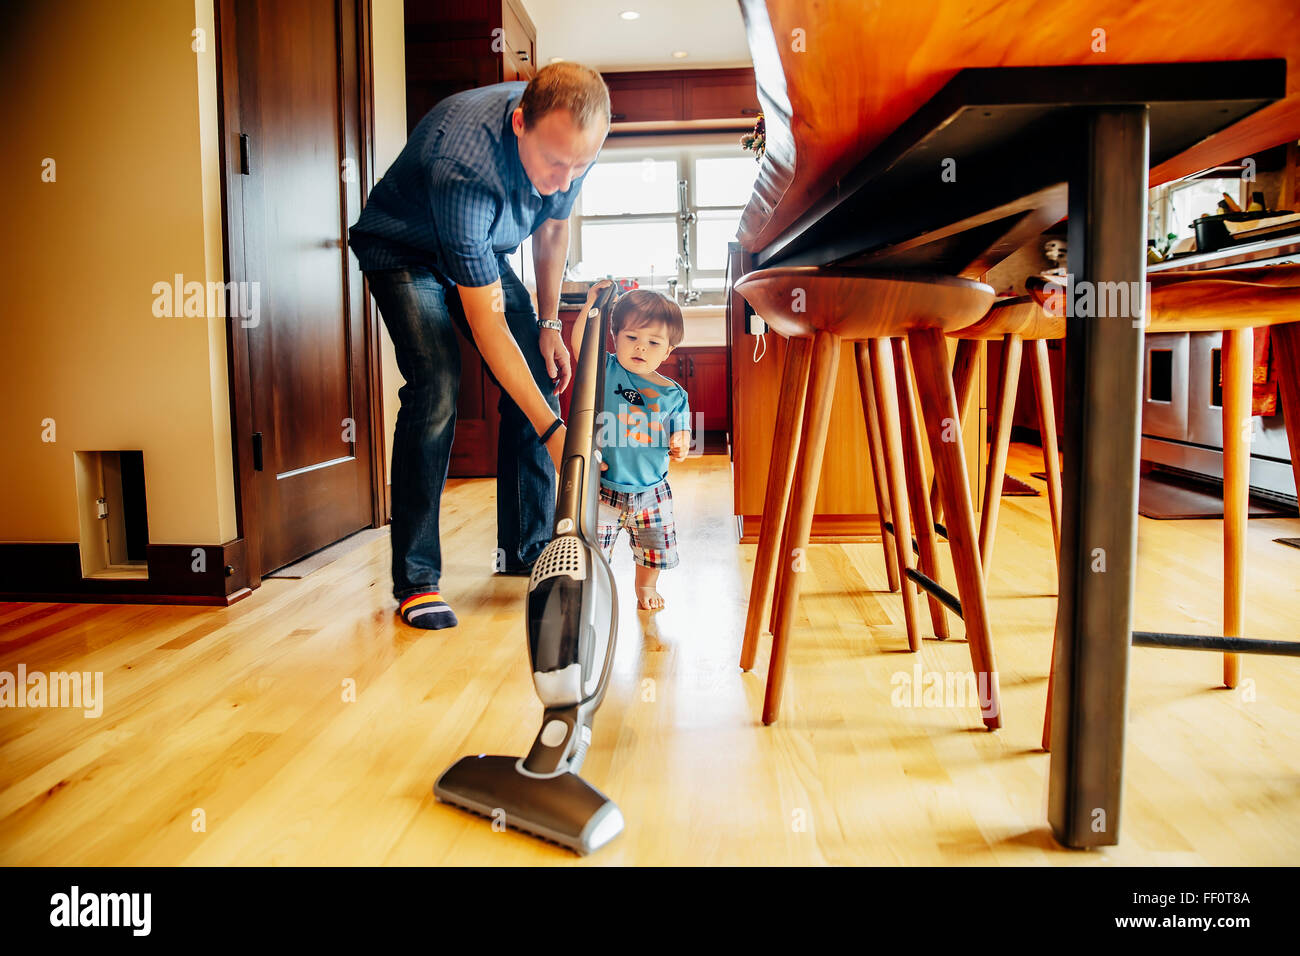 Father and son vacuuming kitchen Stock Photo